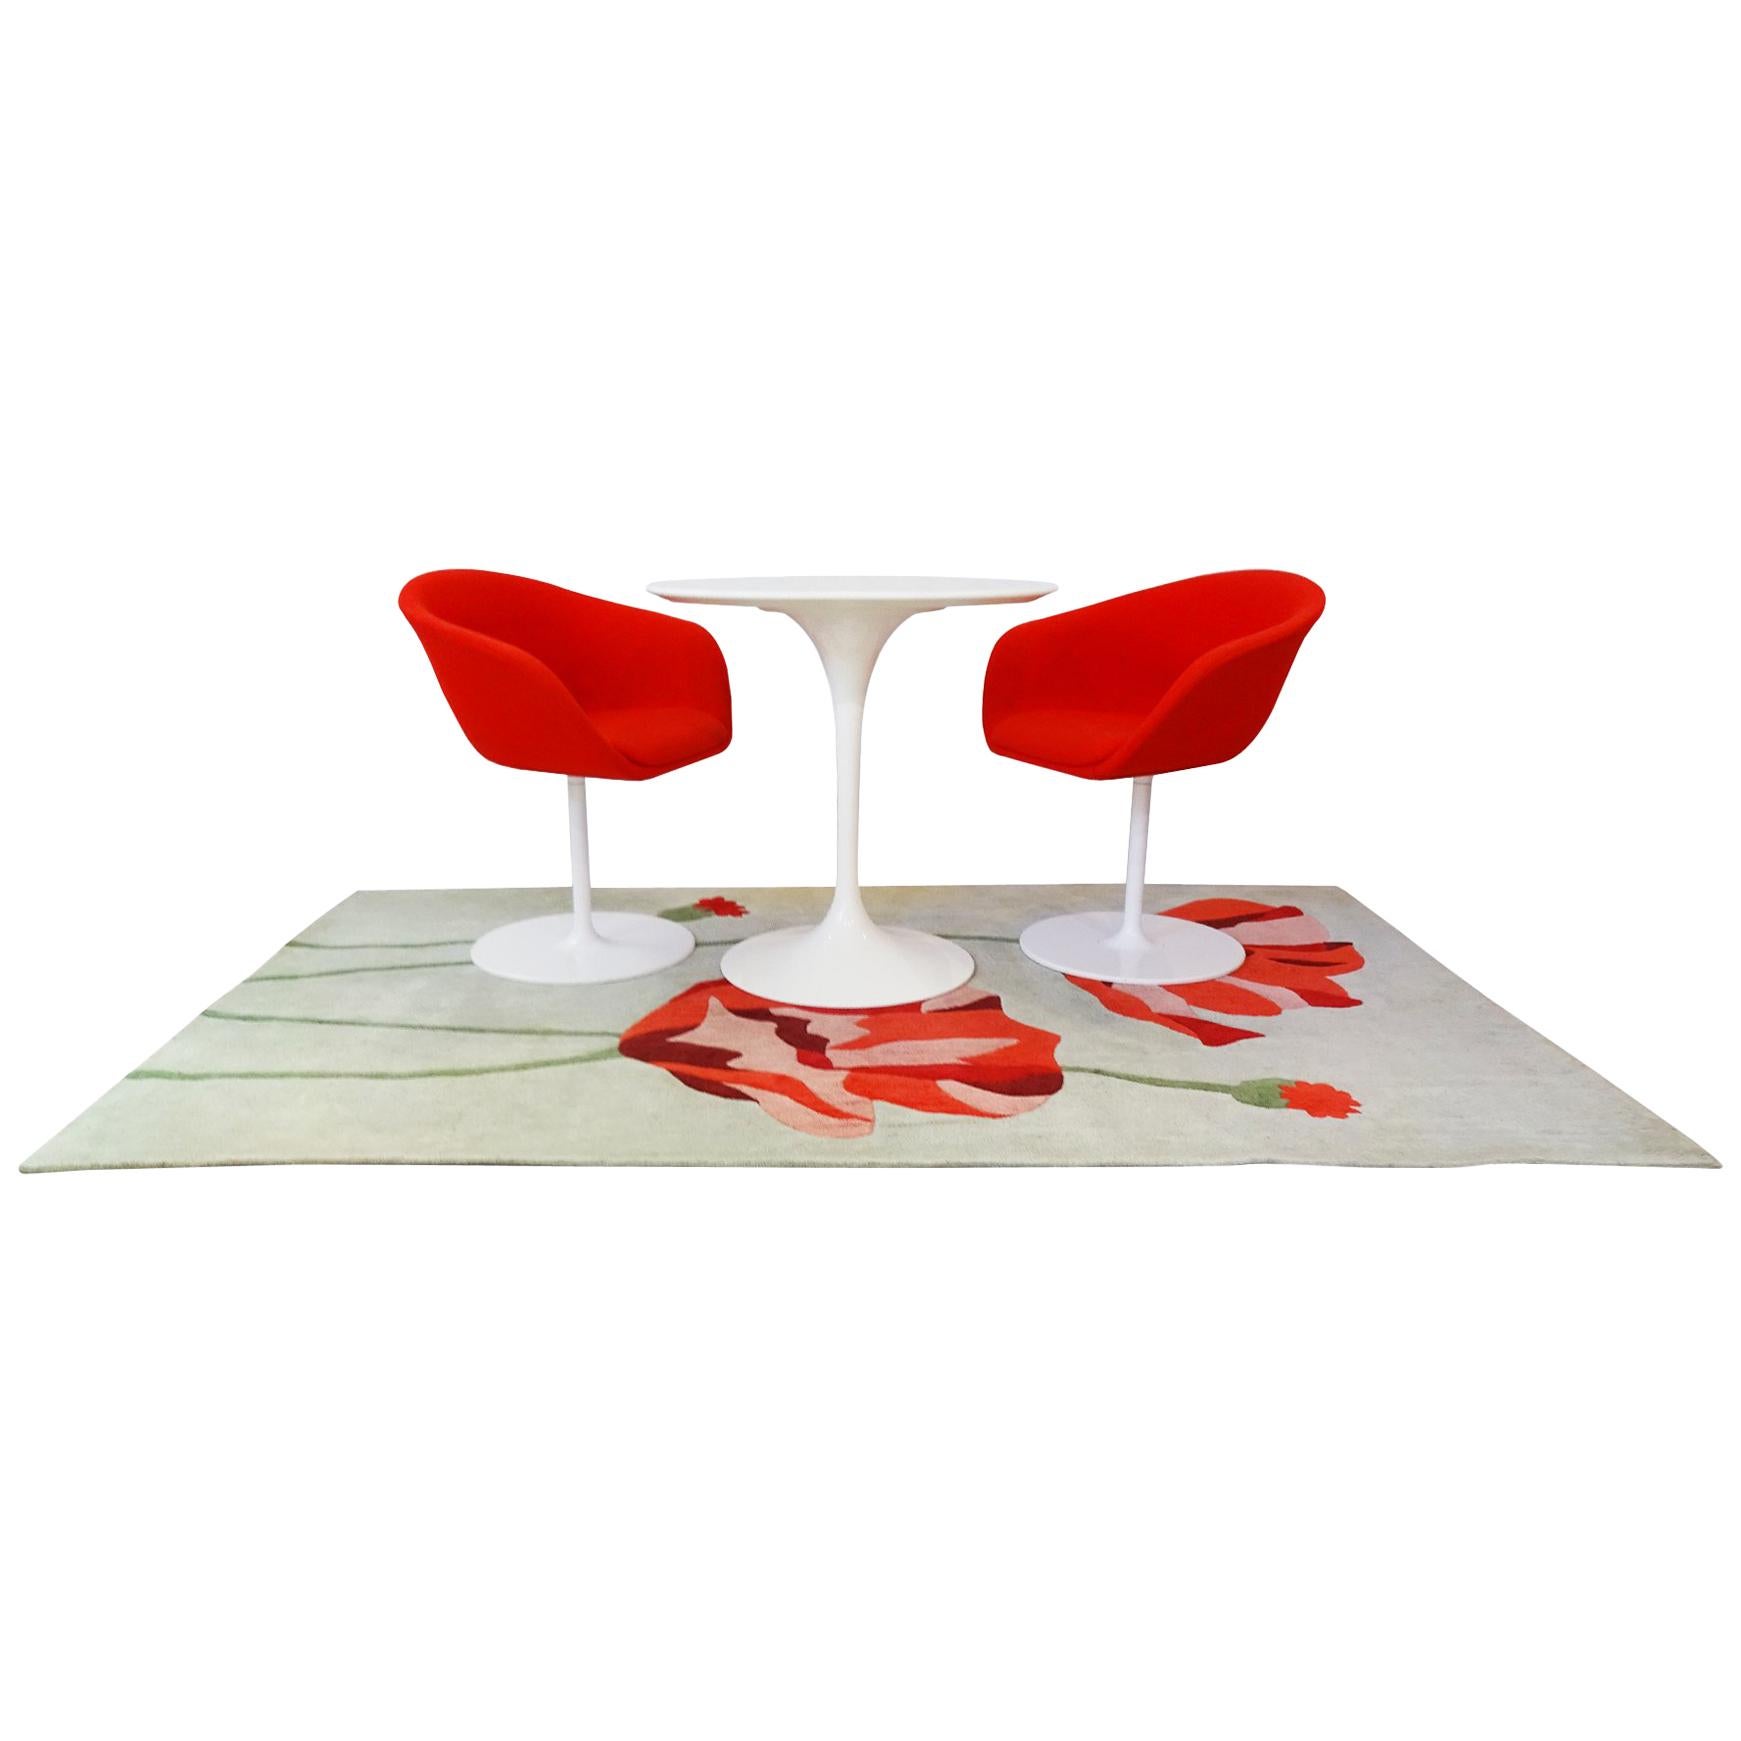 Small Dining Set, Eero Saarinen Knoll Side Table, Arper Chairs and Poppy Rug